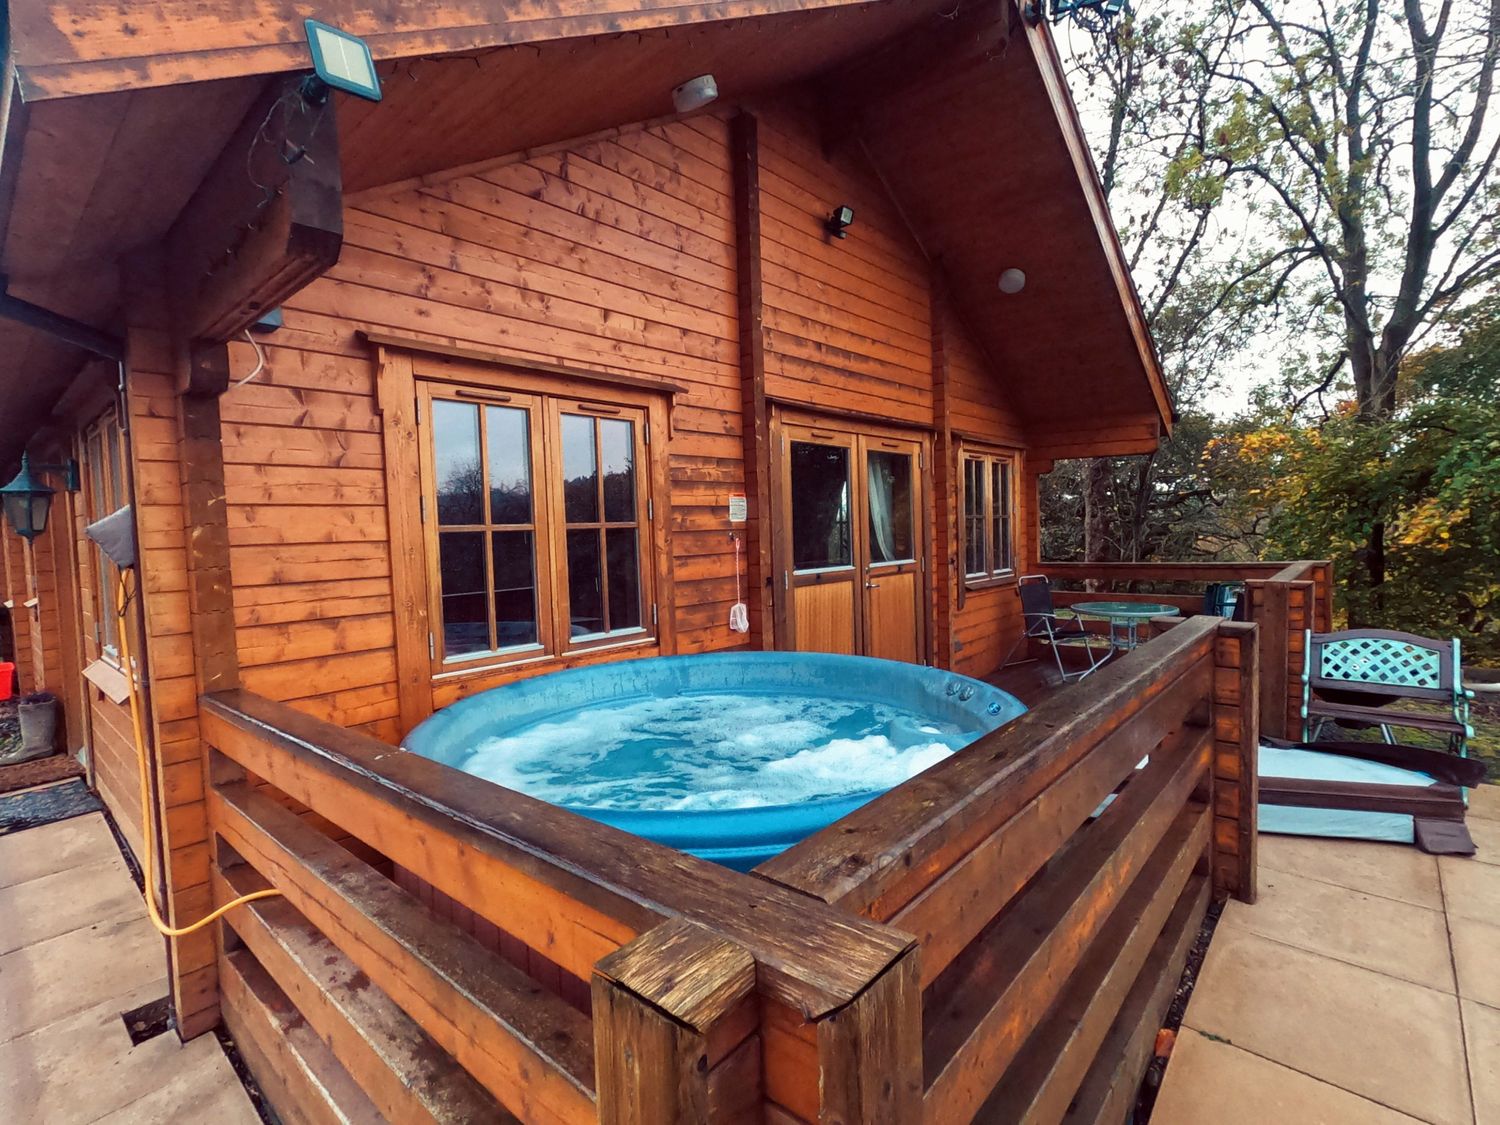 advertise button Bookkeeper The Bothy, Wales - Powys - Wales : Hot Tub Getaways, Hot Tub Cottages, Hot  Tub Lodges and Log Cabins in the UK